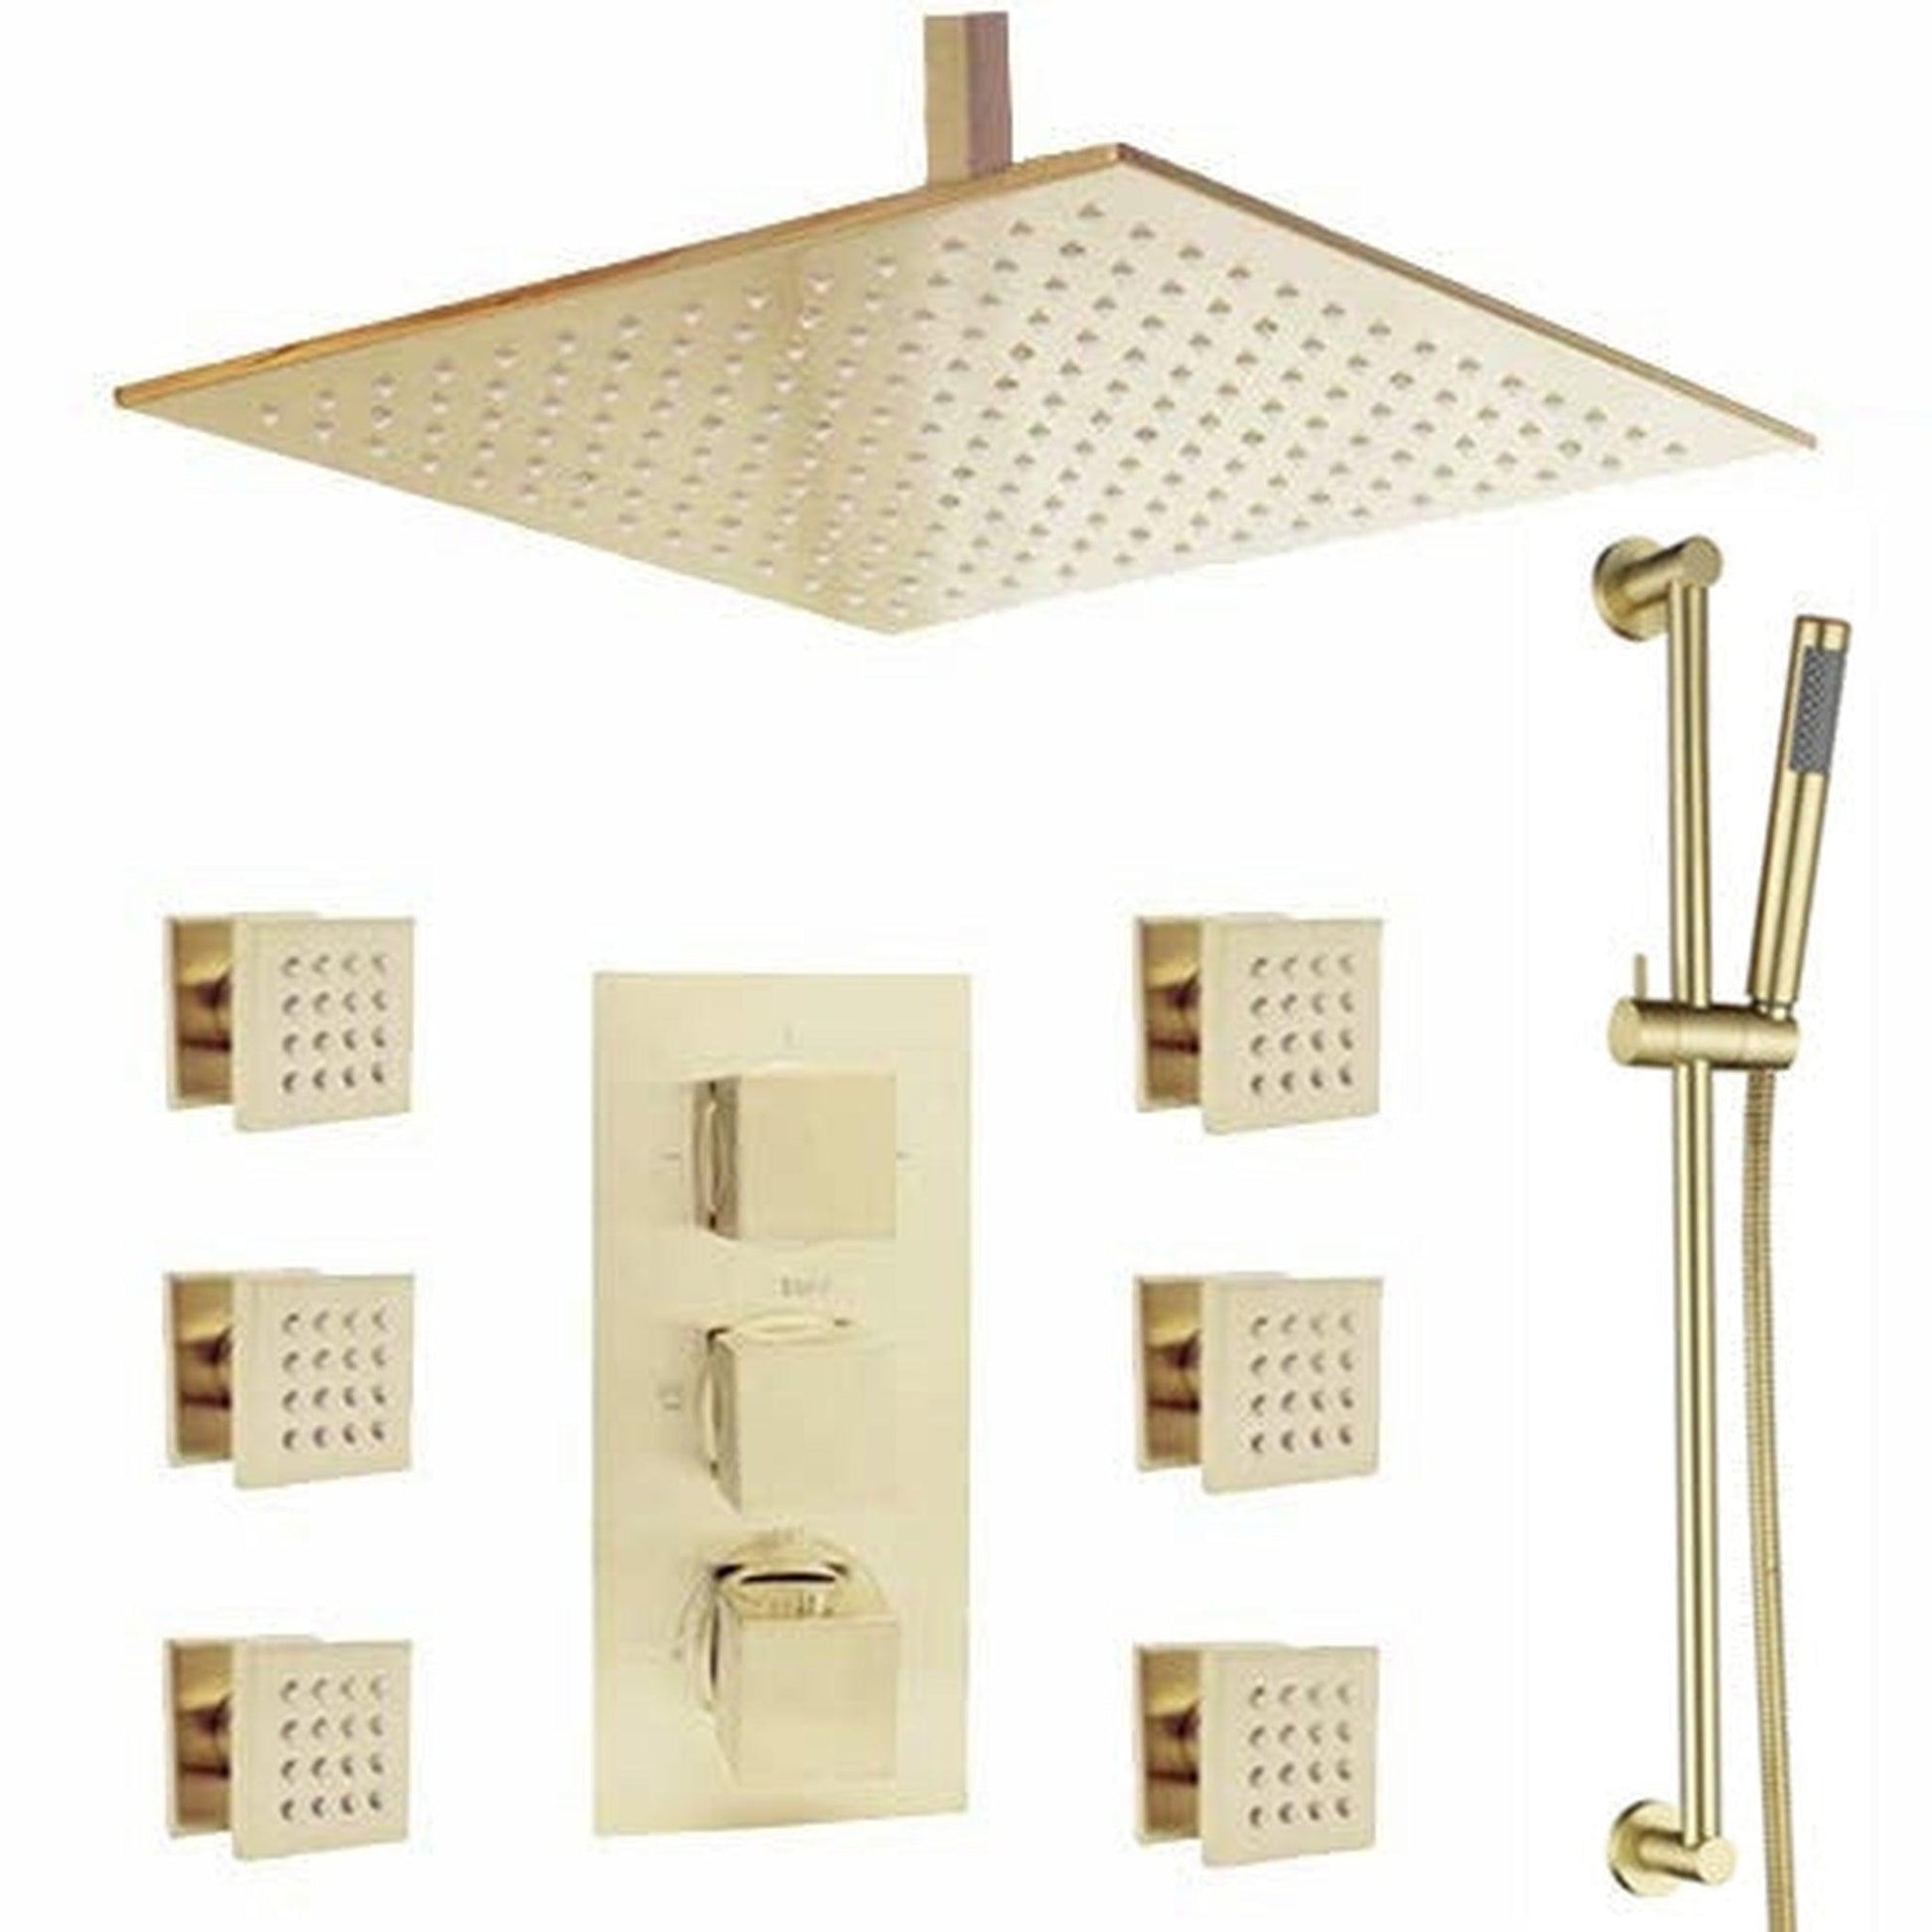 FontanaShowers Verona Creative Luxury 12" Brushed Gold Square Ceiling Mounted Thermostatic Button Mixer Rainfall Shower System With 6-Jet Body Sprays and Hand Shower